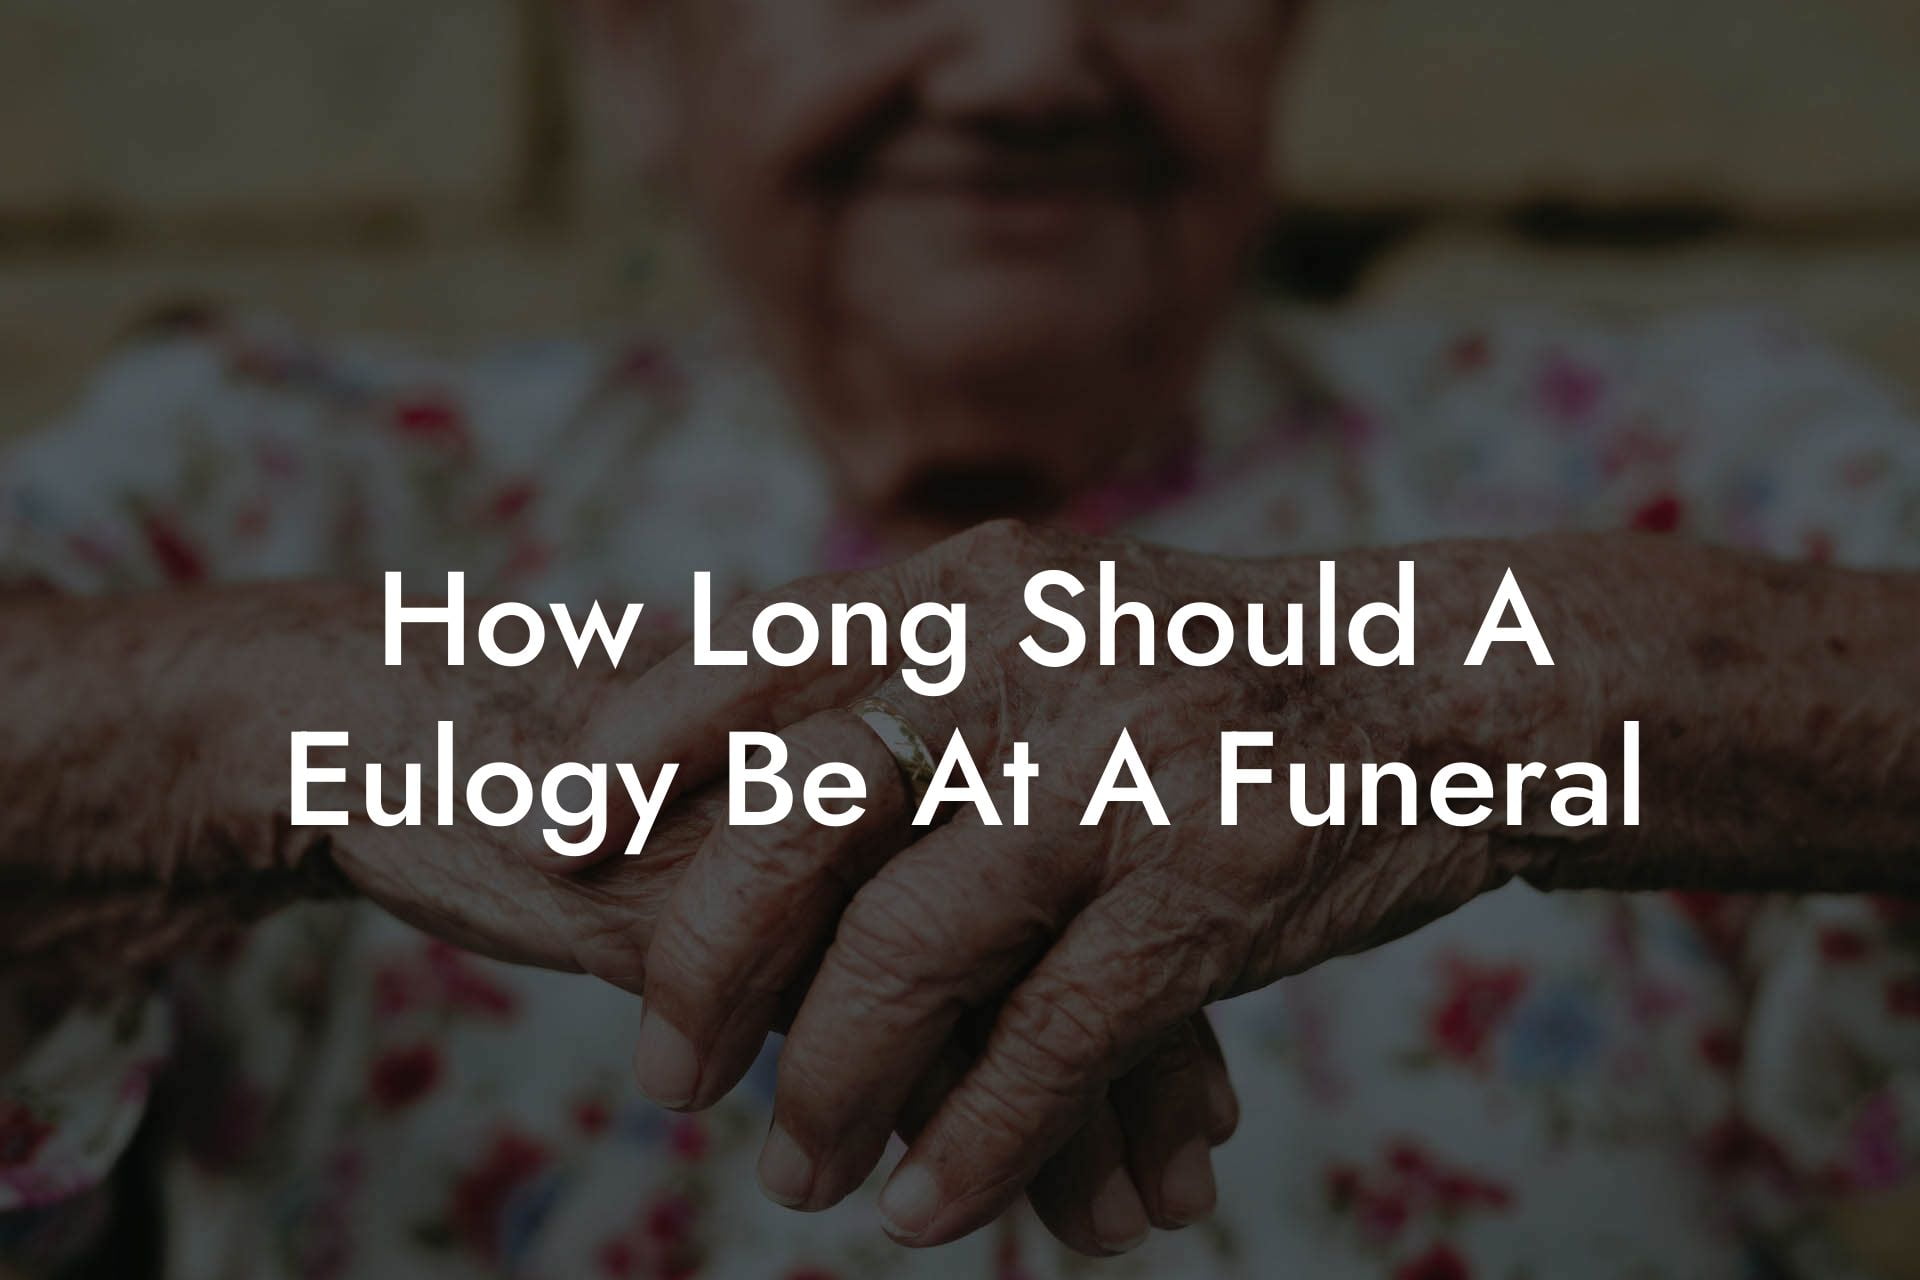 How Long Should A Eulogy Be At A Funeral